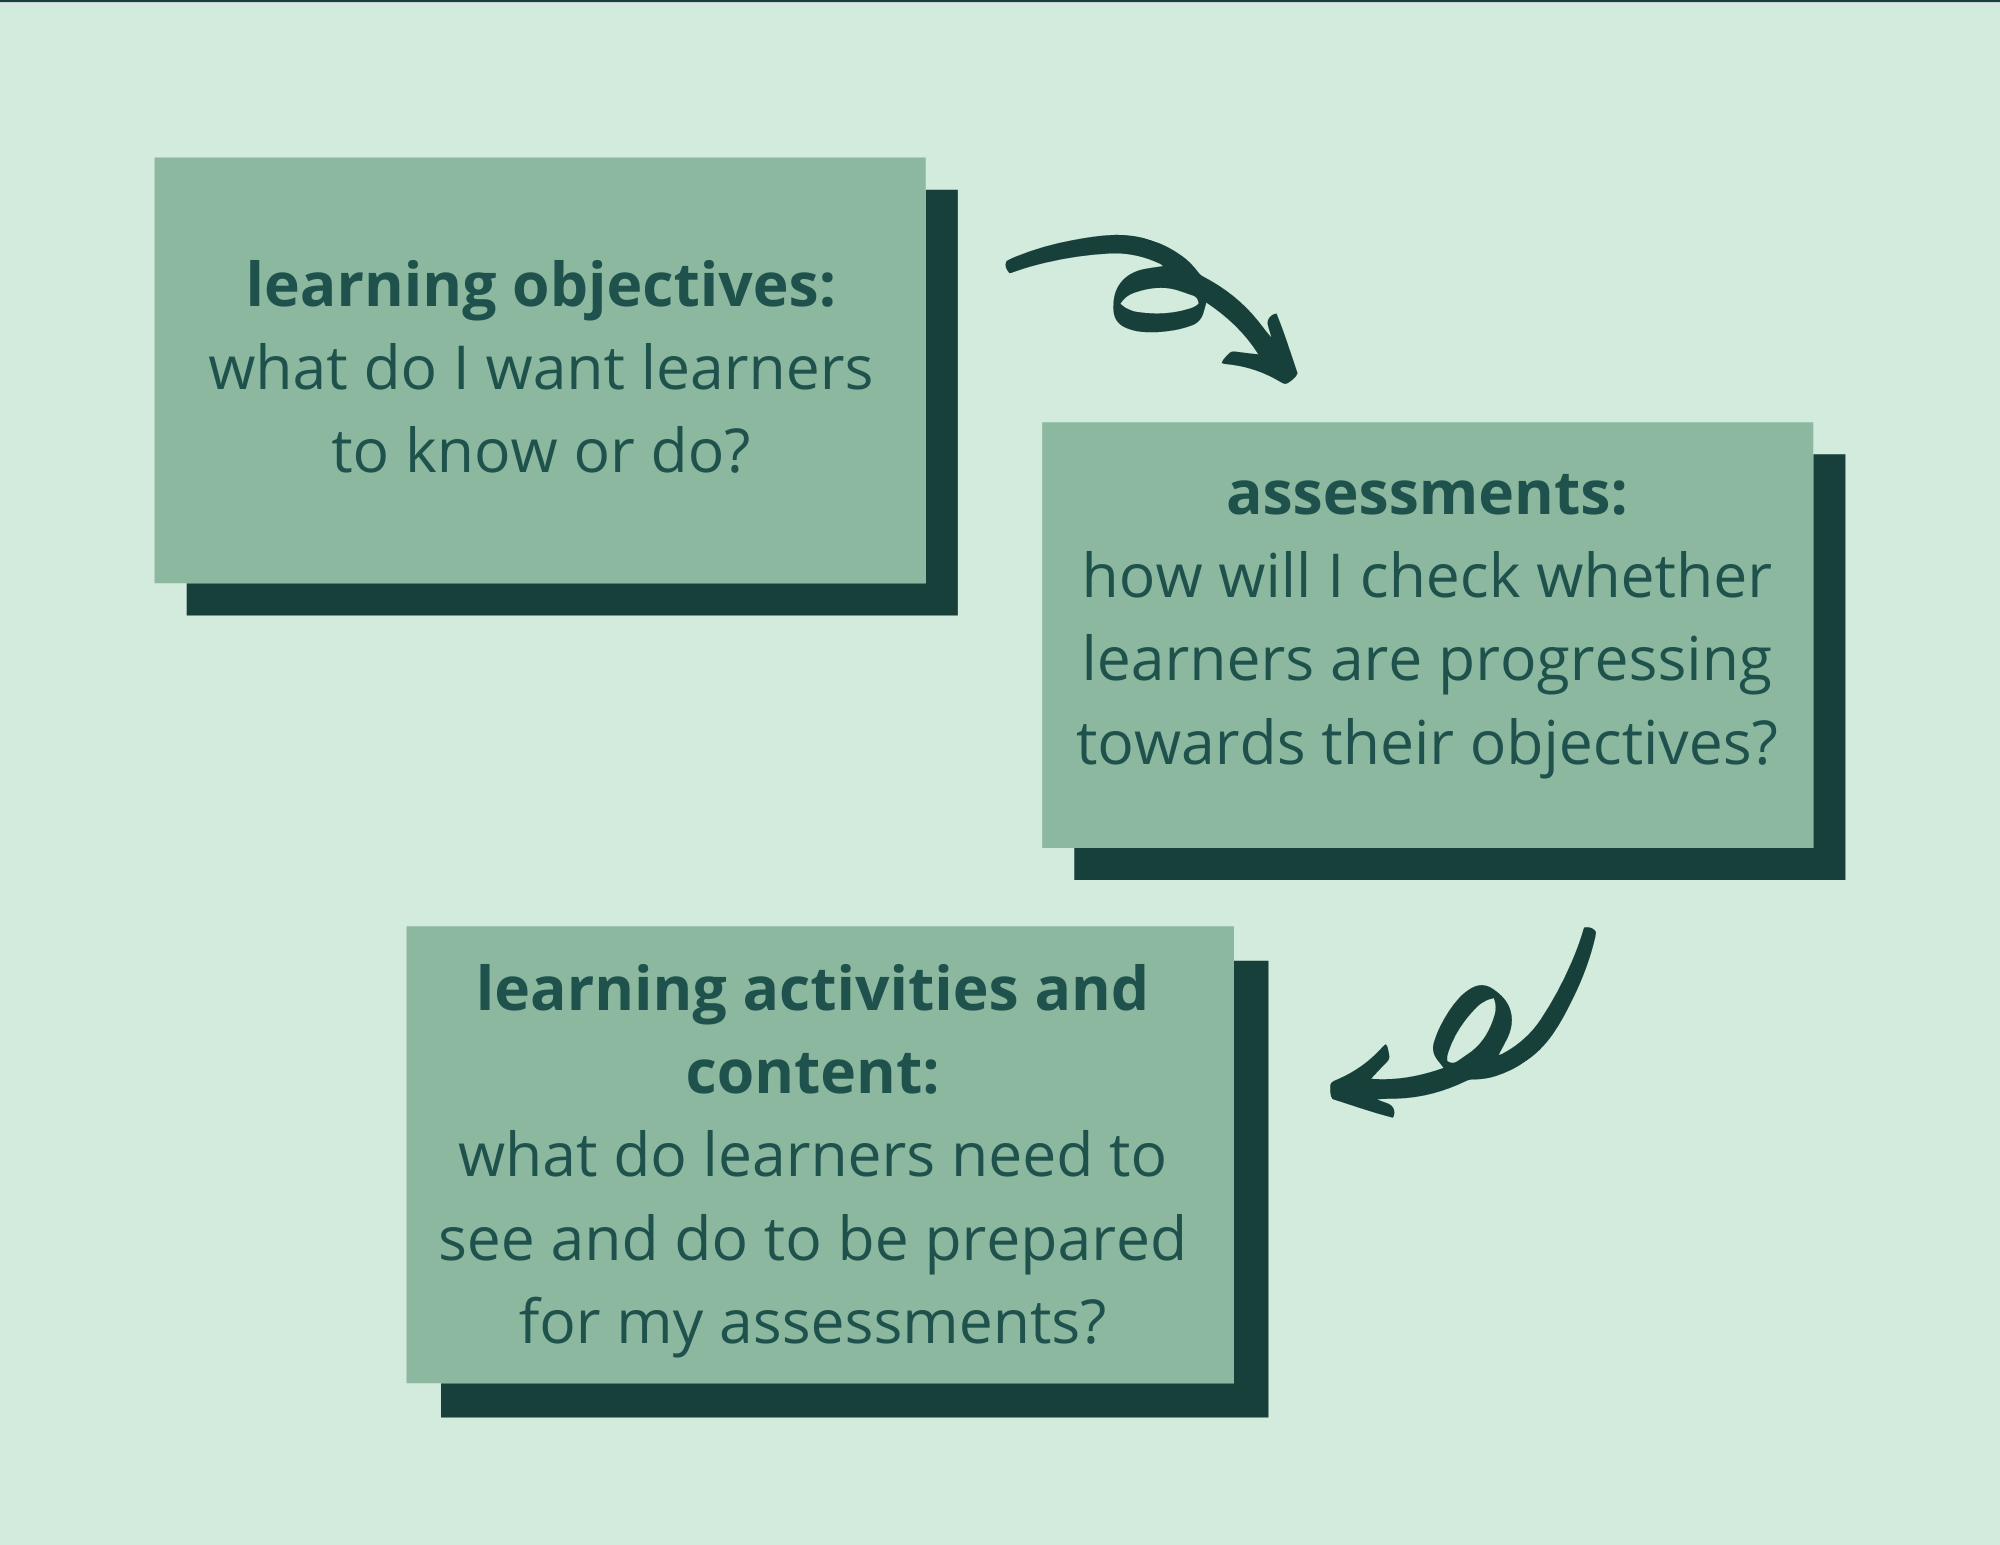 Diagram showing three steps of backward design, connected with arrows. Box 1 labeled with "learning objectives: what do I want learners to know or do?" Box 2 labeled with "assessments: ho will I check whether learners are progressing towards their objectives?" Box 3 labeled with: "learning activities and content: what do learners need to see and do to be prepared for my assessments?"